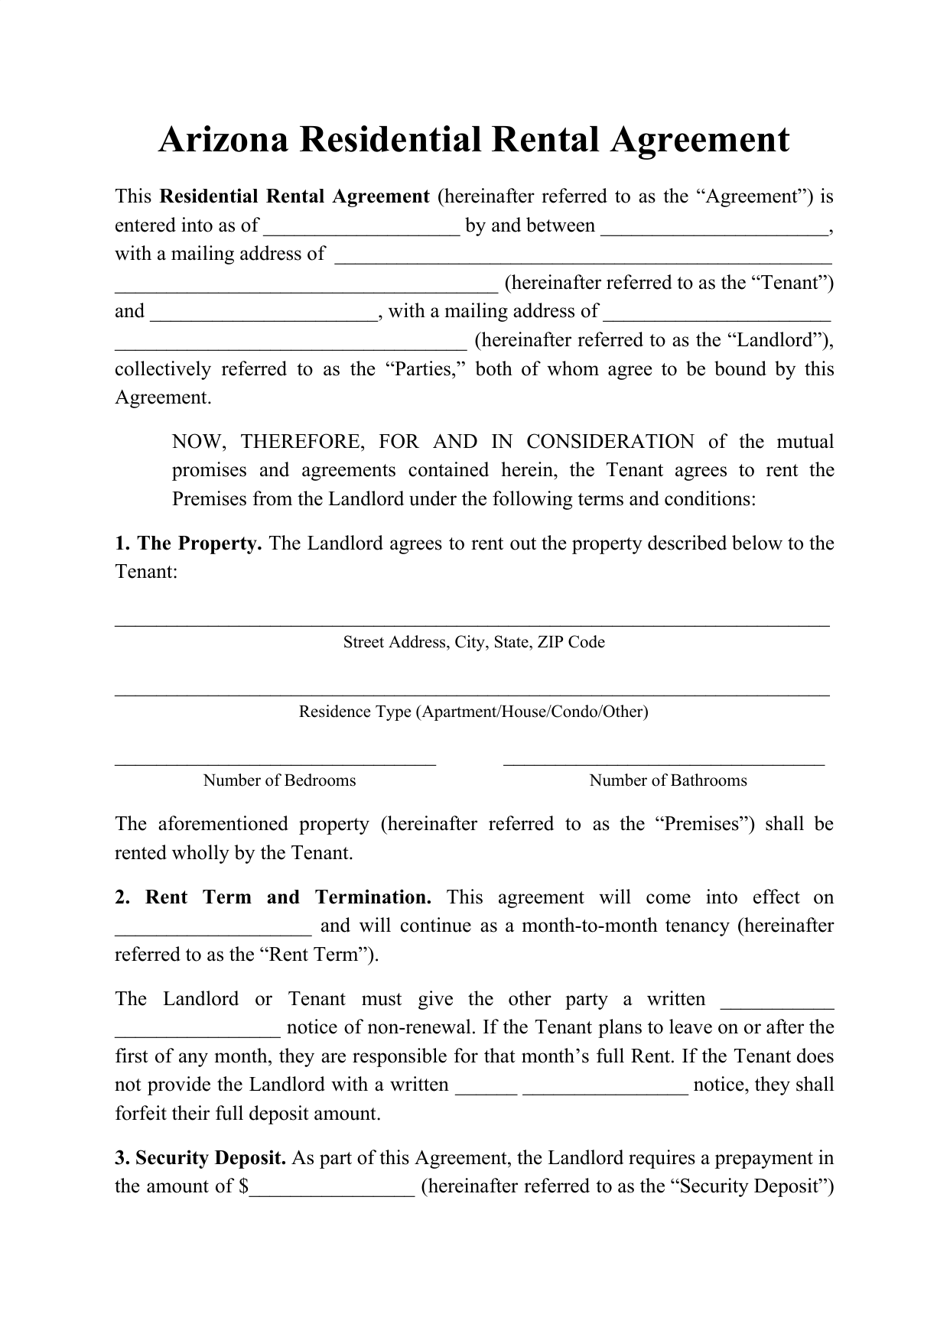 Residential Rental Agreement Template - Arizona, Page 1